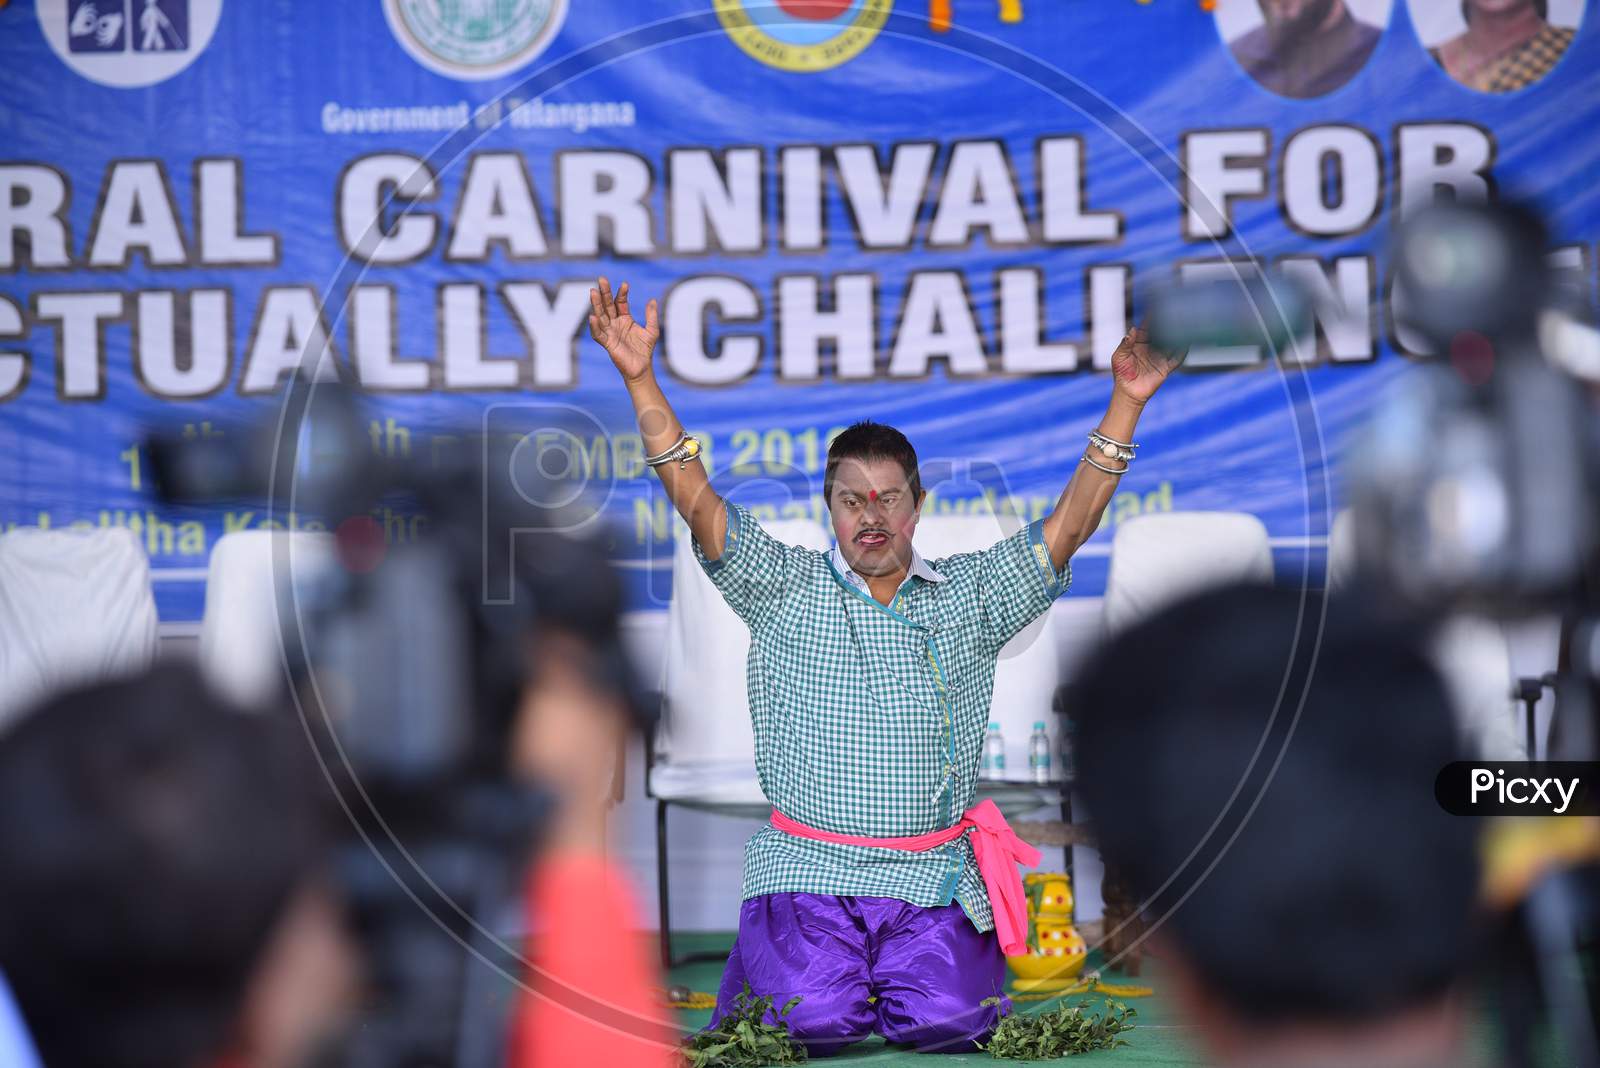 An intellectually challenged kid dances at Carnival for Intellectually challenged